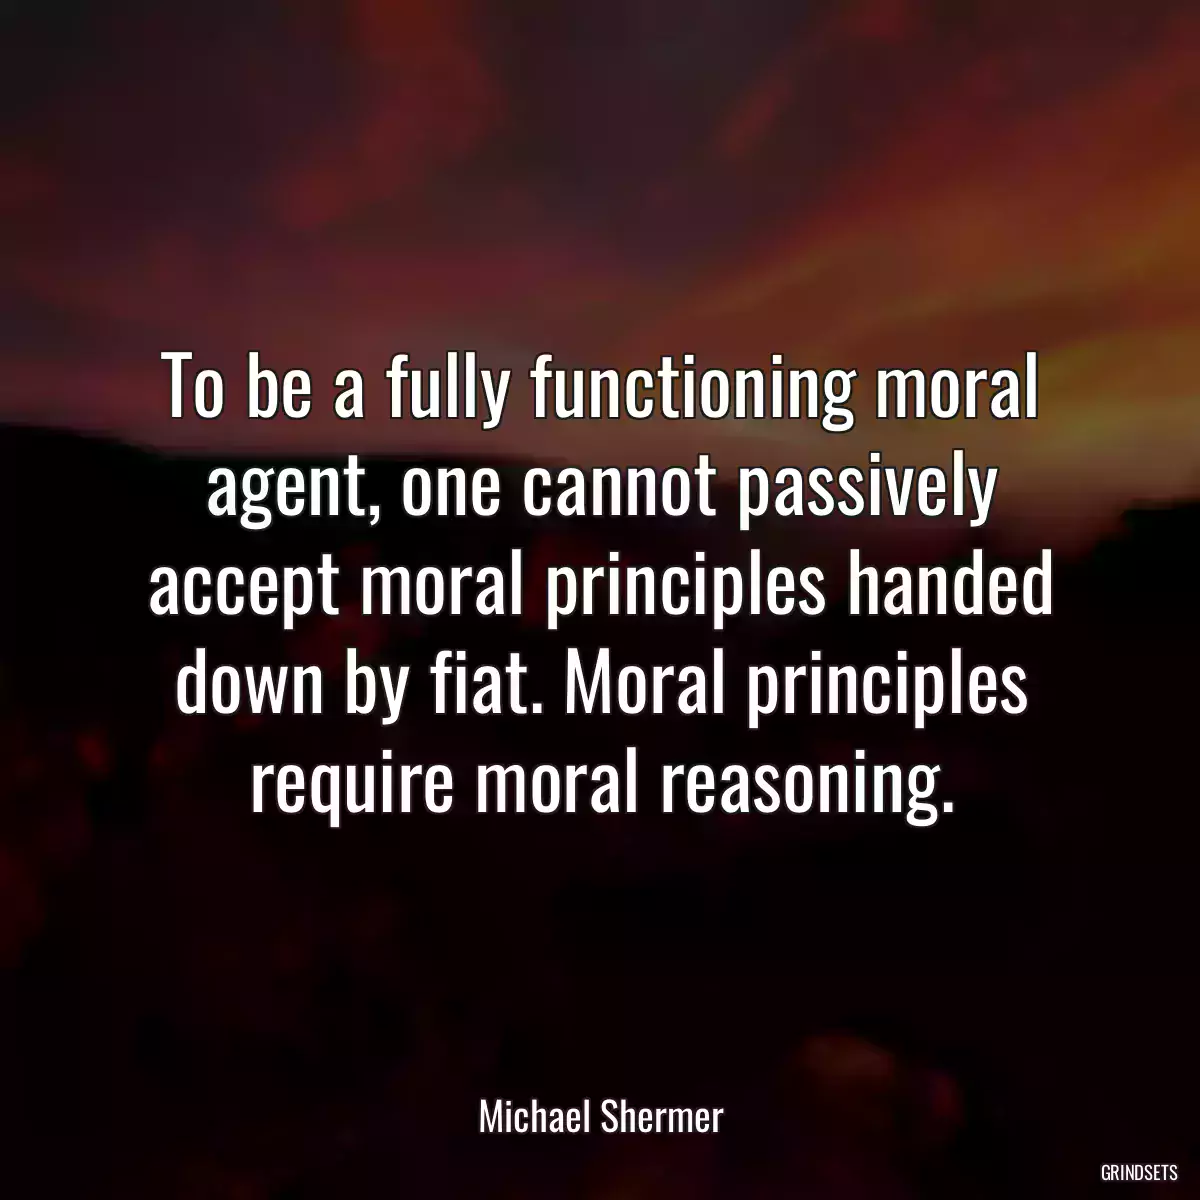 To be a fully functioning moral agent, one cannot passively accept moral principles handed down by fiat. Moral principles require moral reasoning.